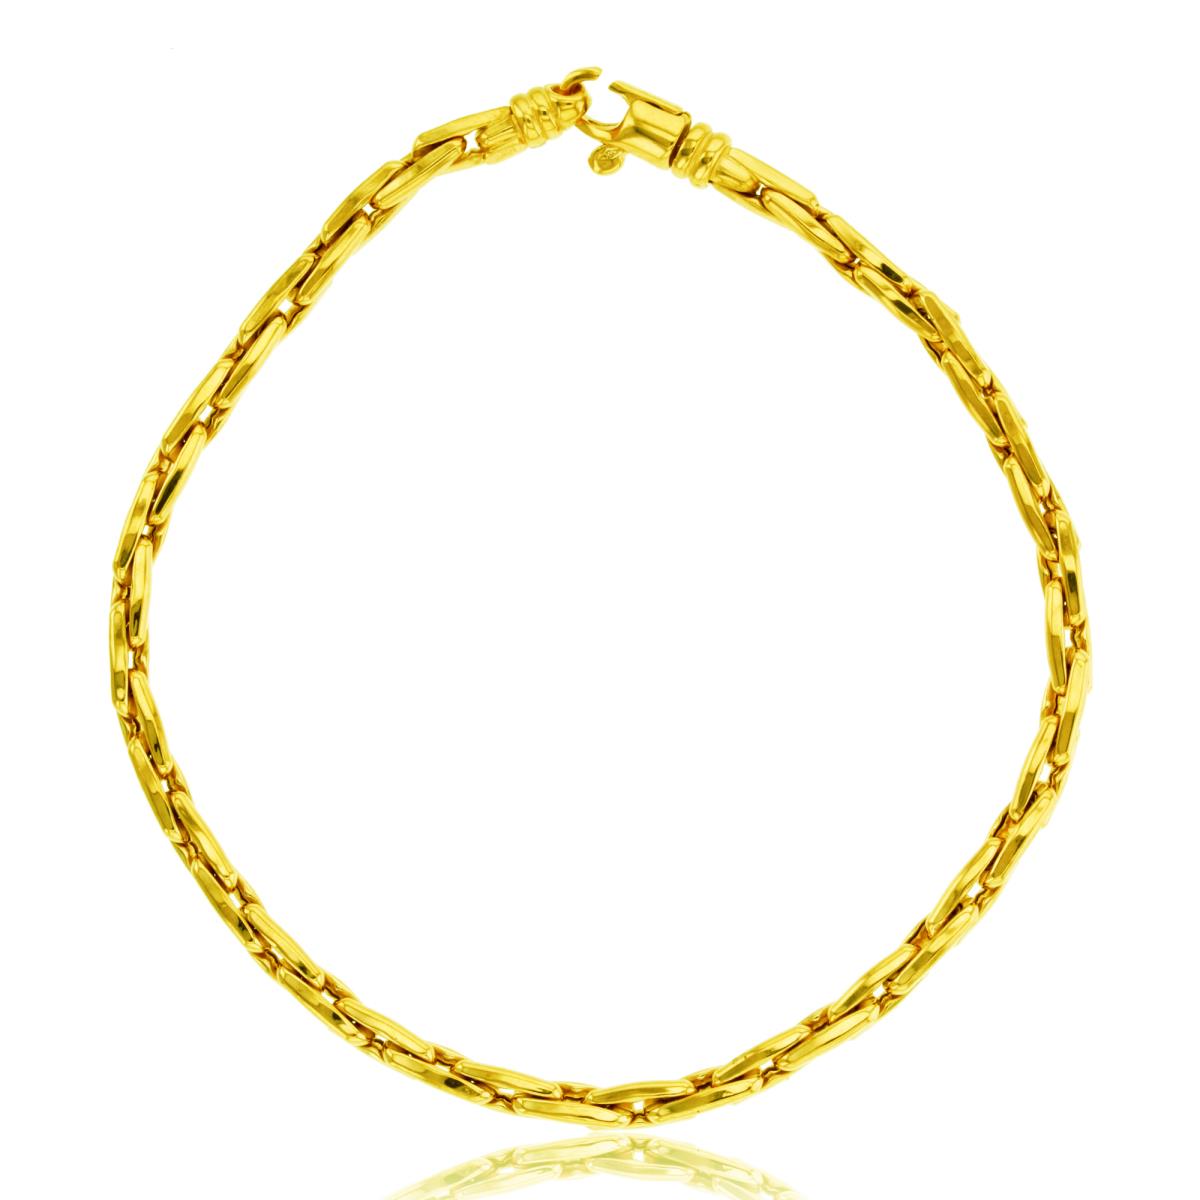 14K Yellow Gold 3.30mm Fancy Elongated Square Cable 7.75" Chain Bracelet